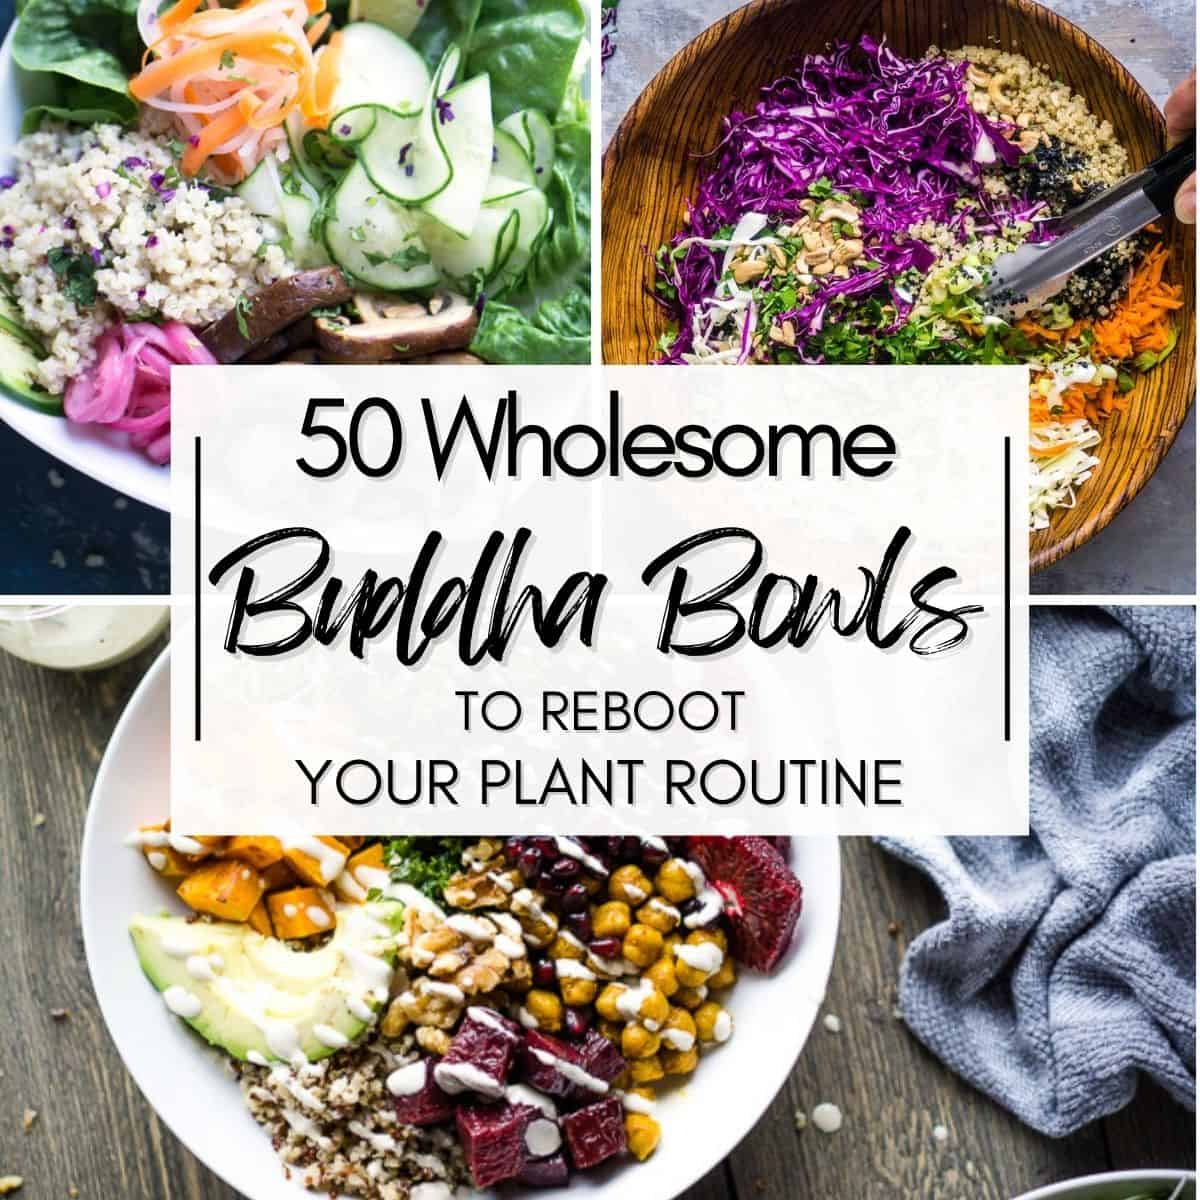 13 Amazingly Easy Buddha Bowls for Weight Loss